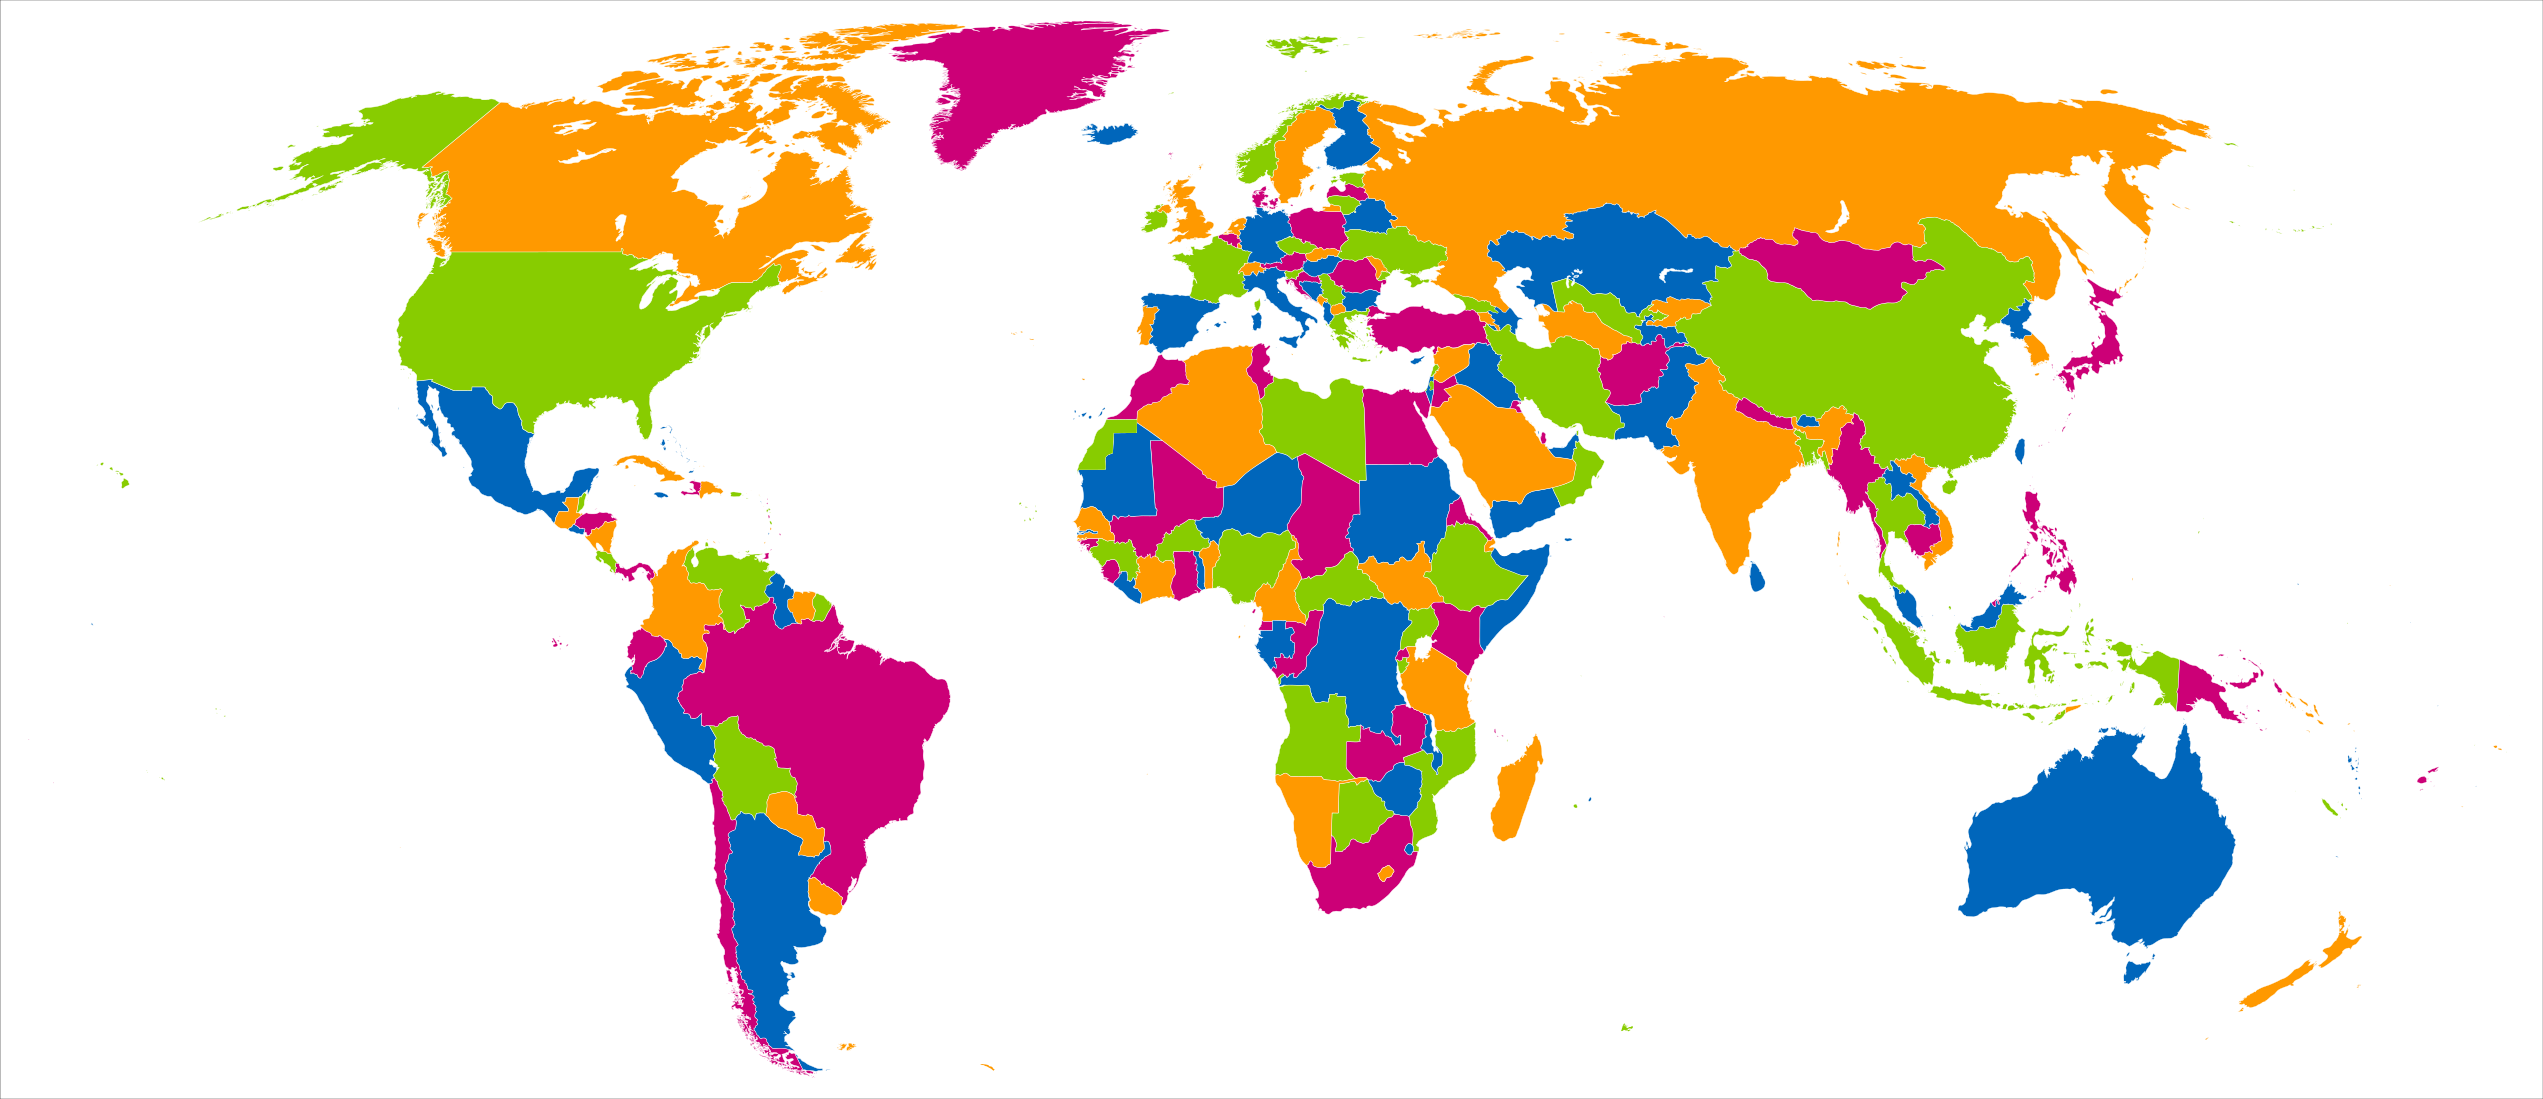 World map with highlighted countries